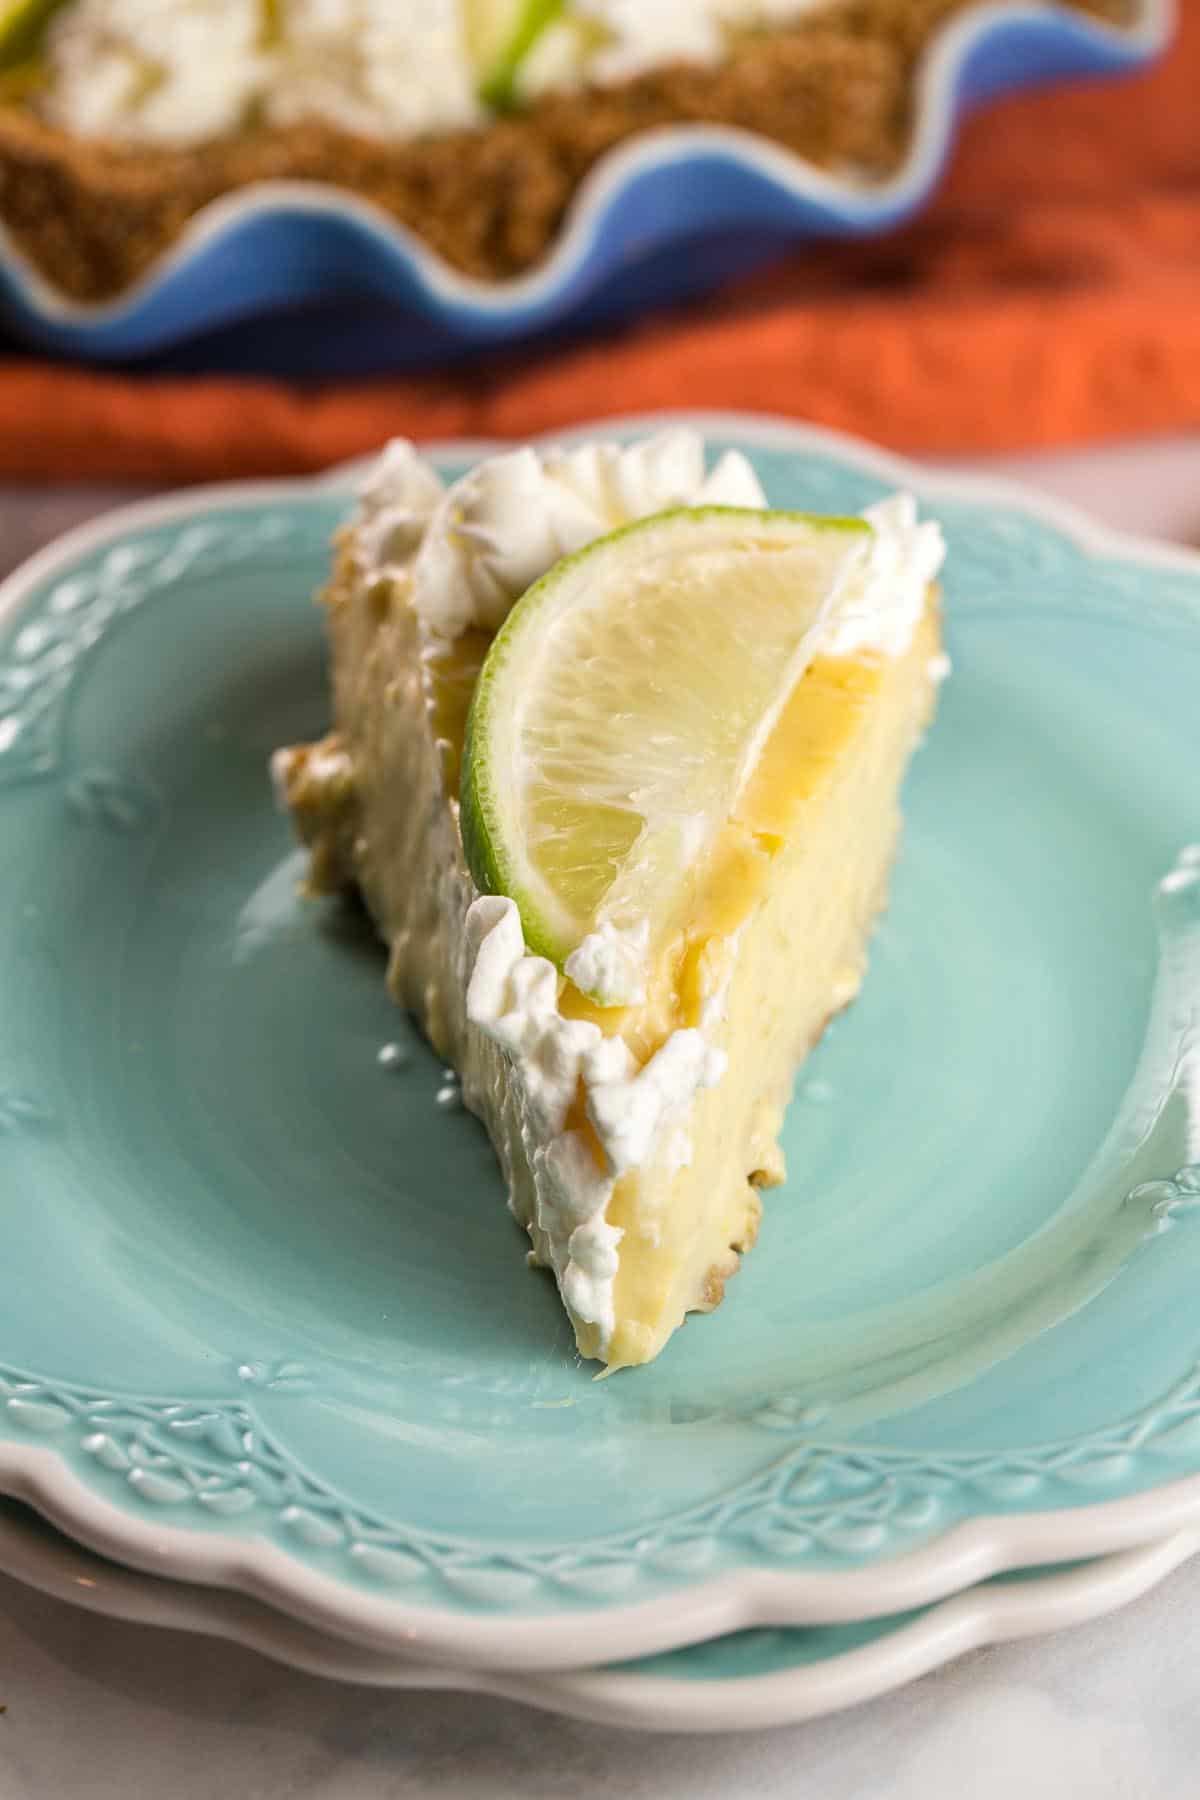 front view of a triangular slice of pie with a soft, fluffy custard-like texture